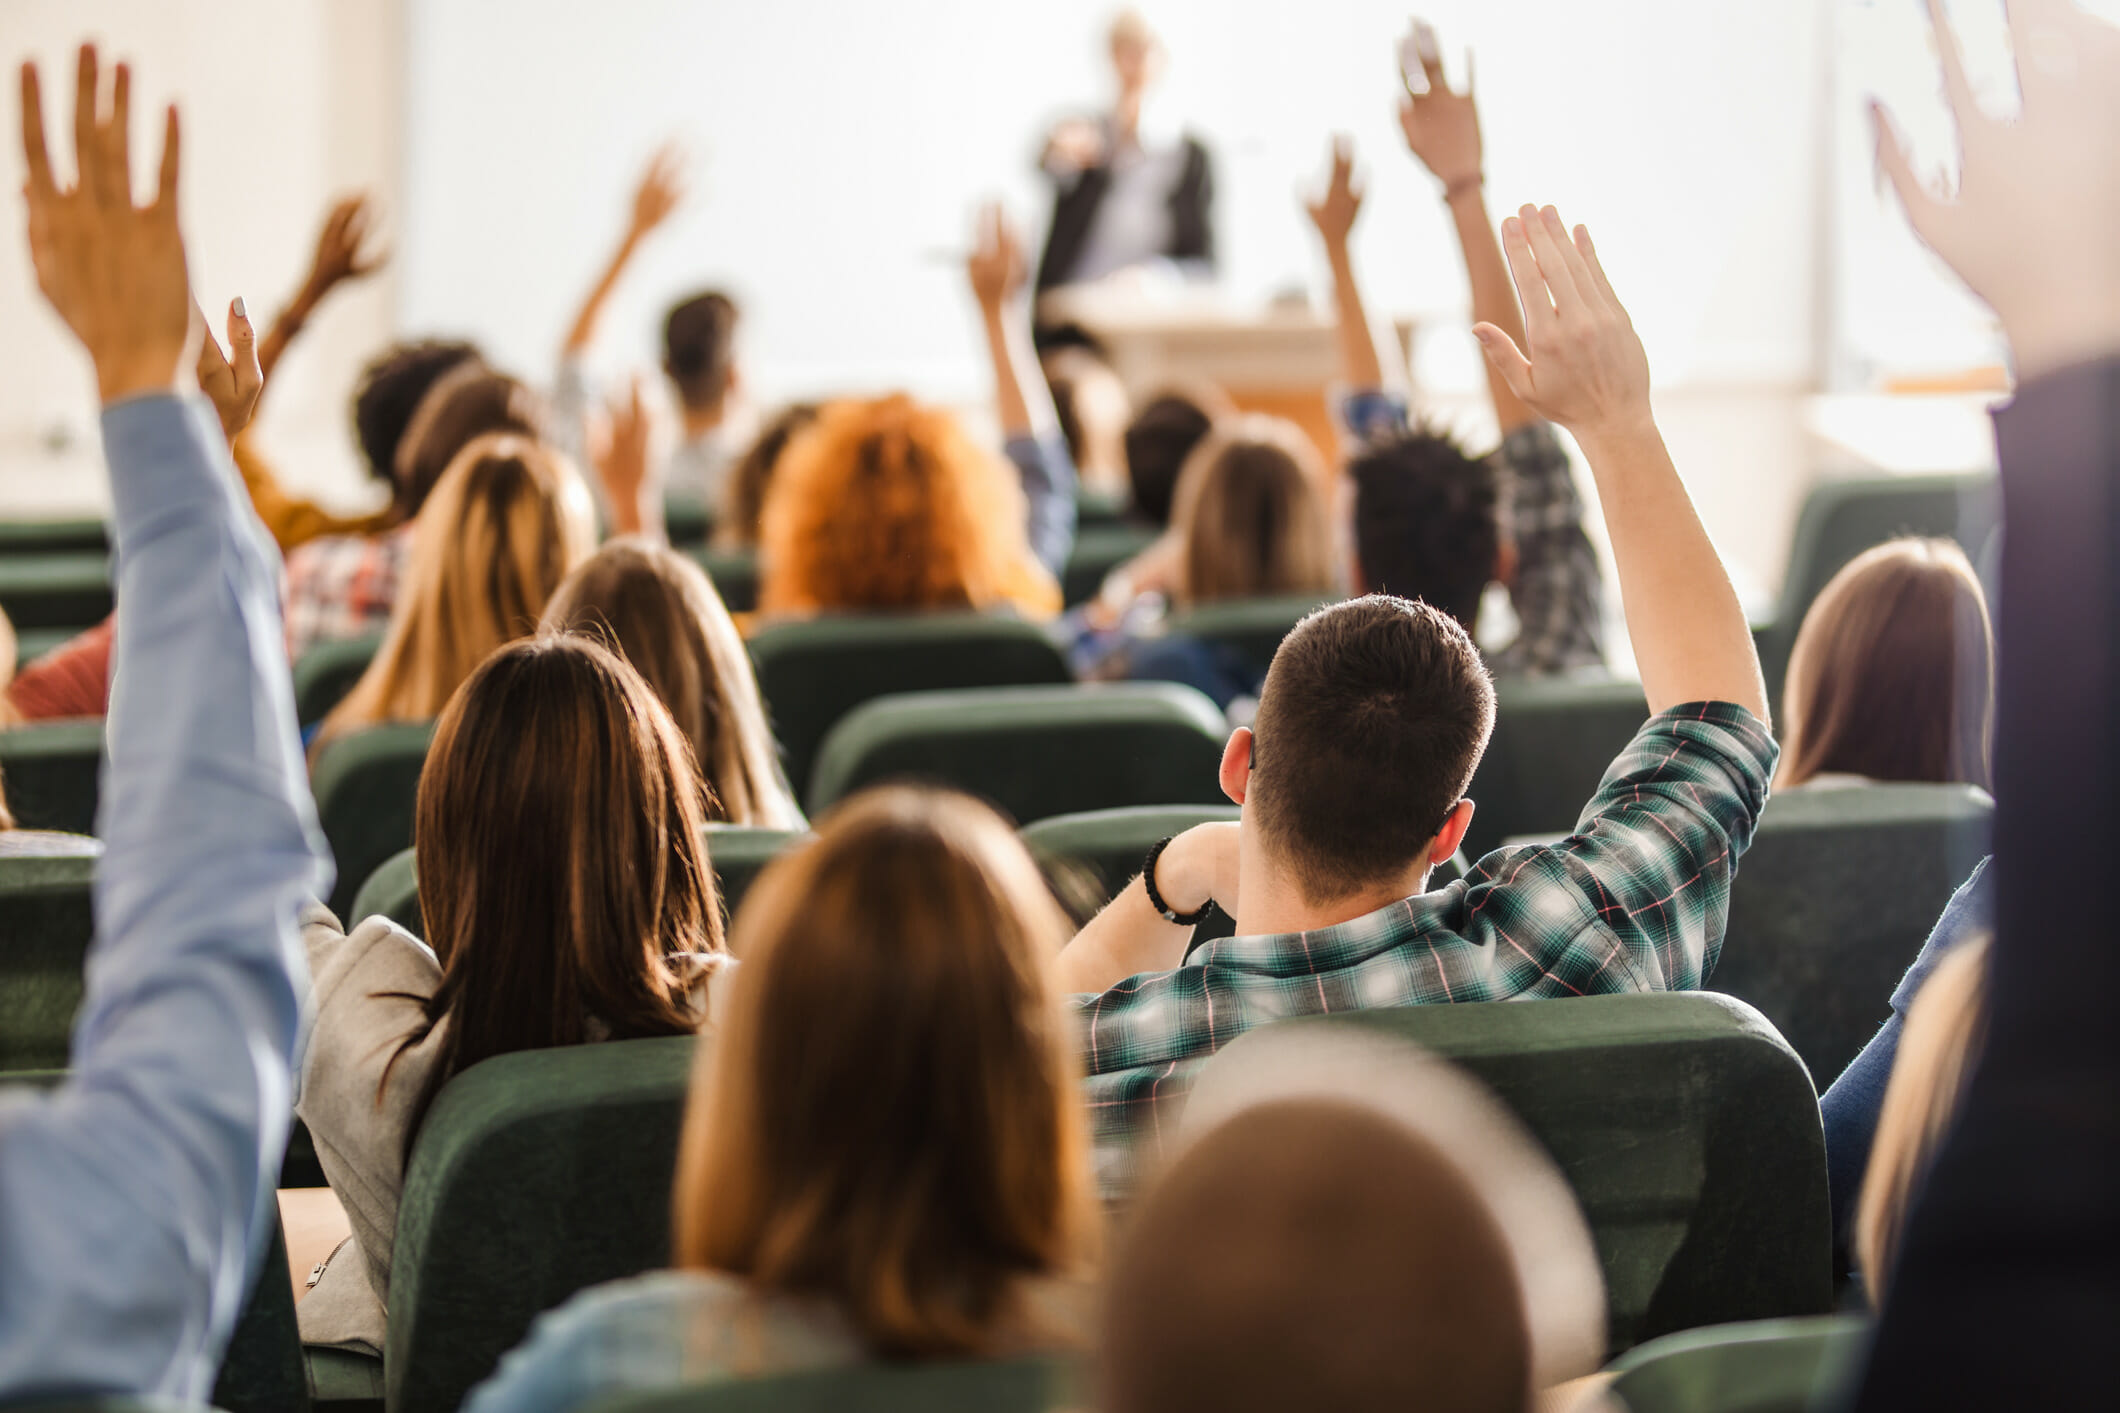 College students raising hands in class